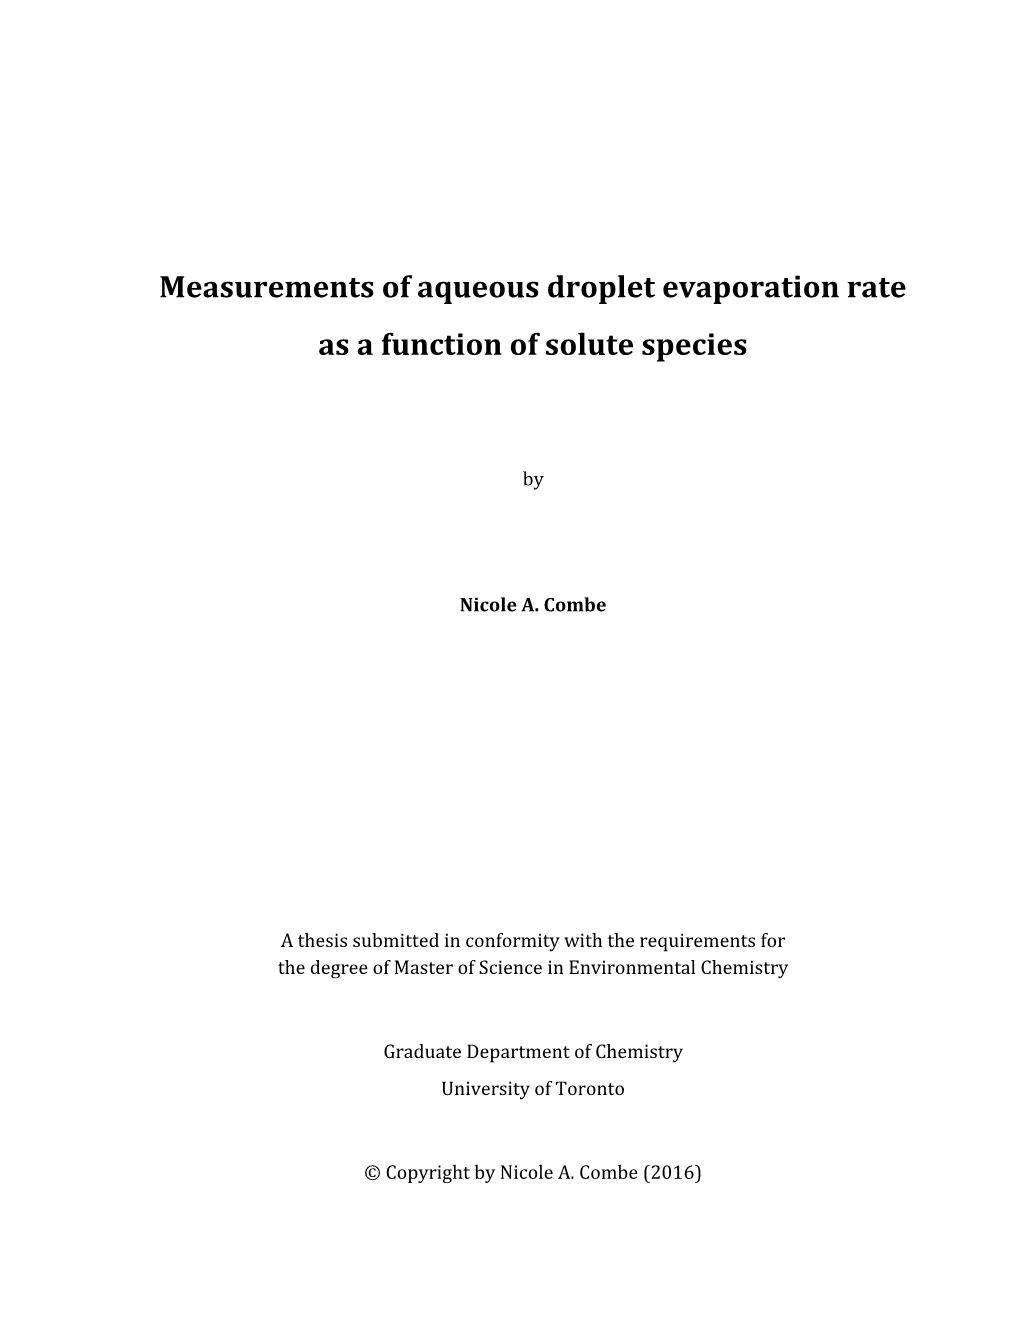 Measurements of Aqueous Droplet Evaporation Rate As a Function of Solute Species